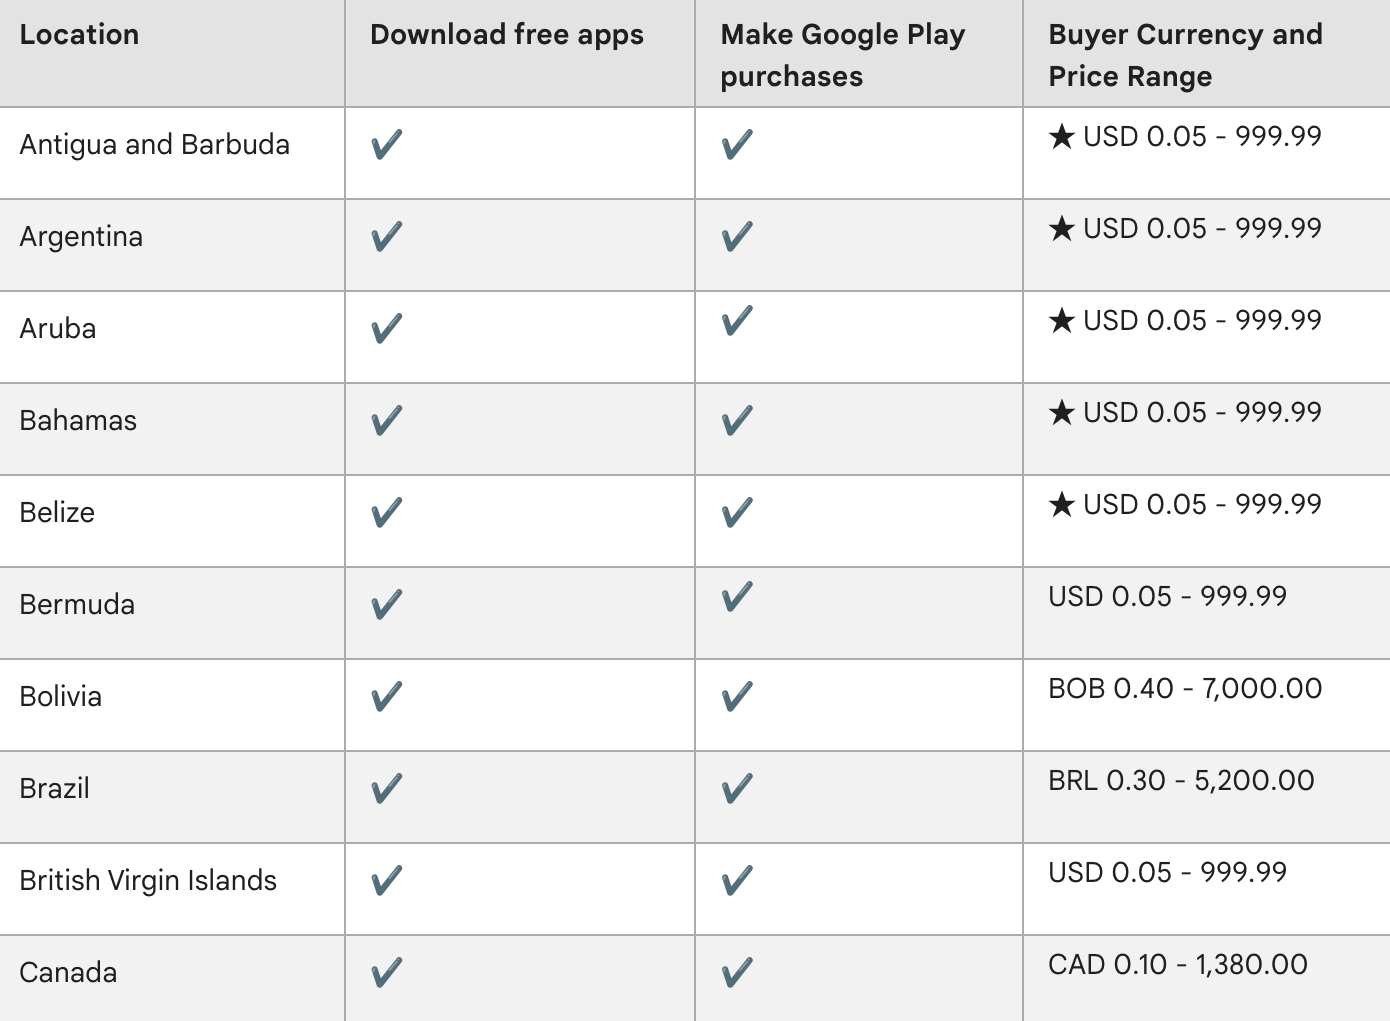 A table showing the price ranges of apps on Google Play in various countries.